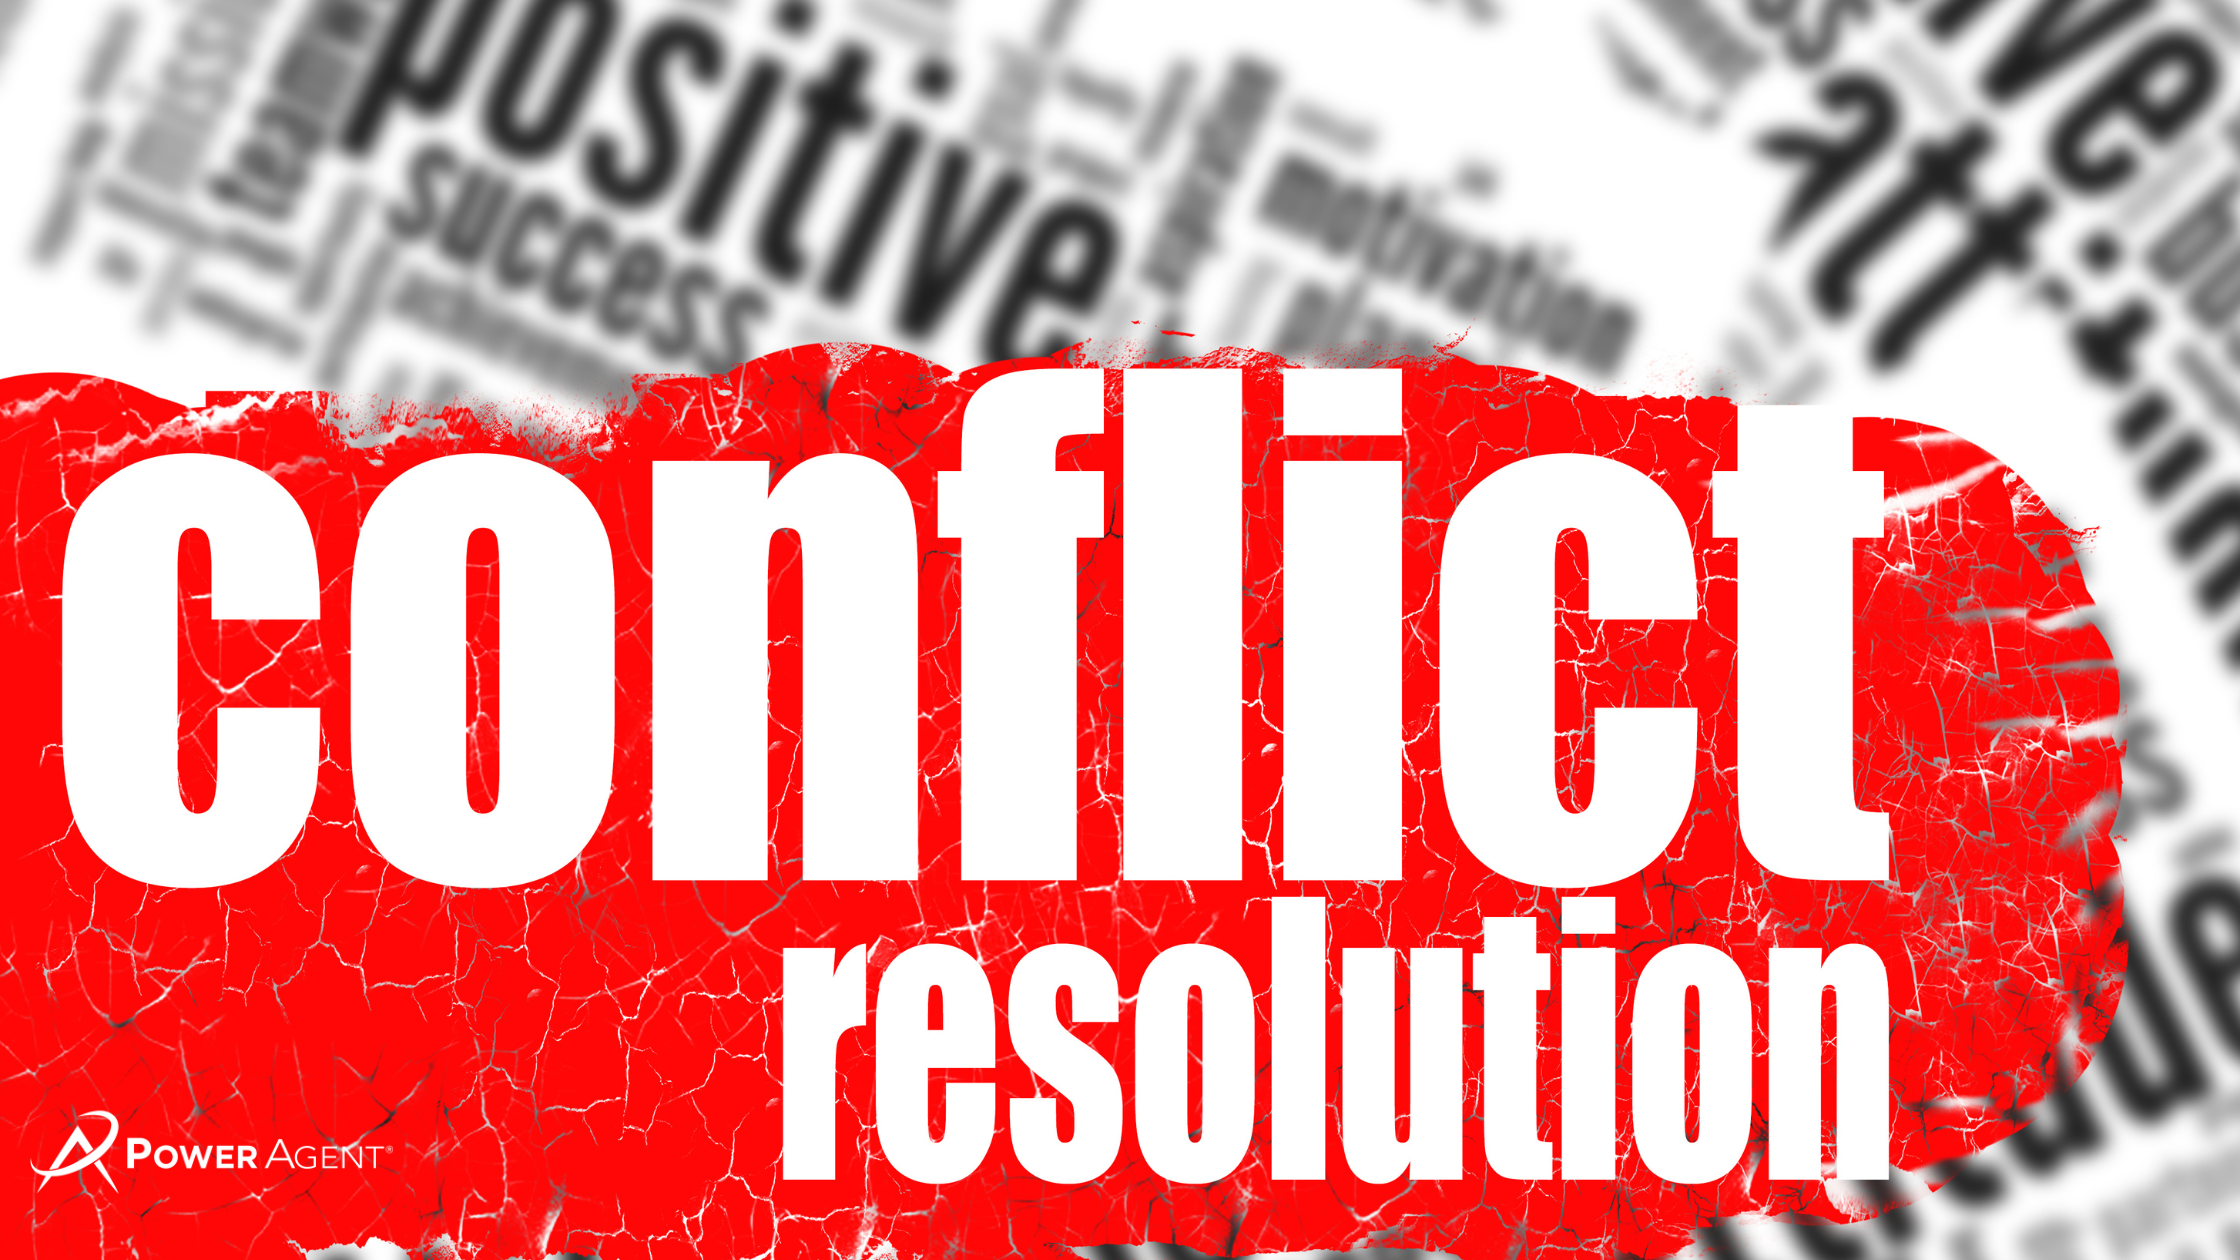 real estate leadership - conflict resolution